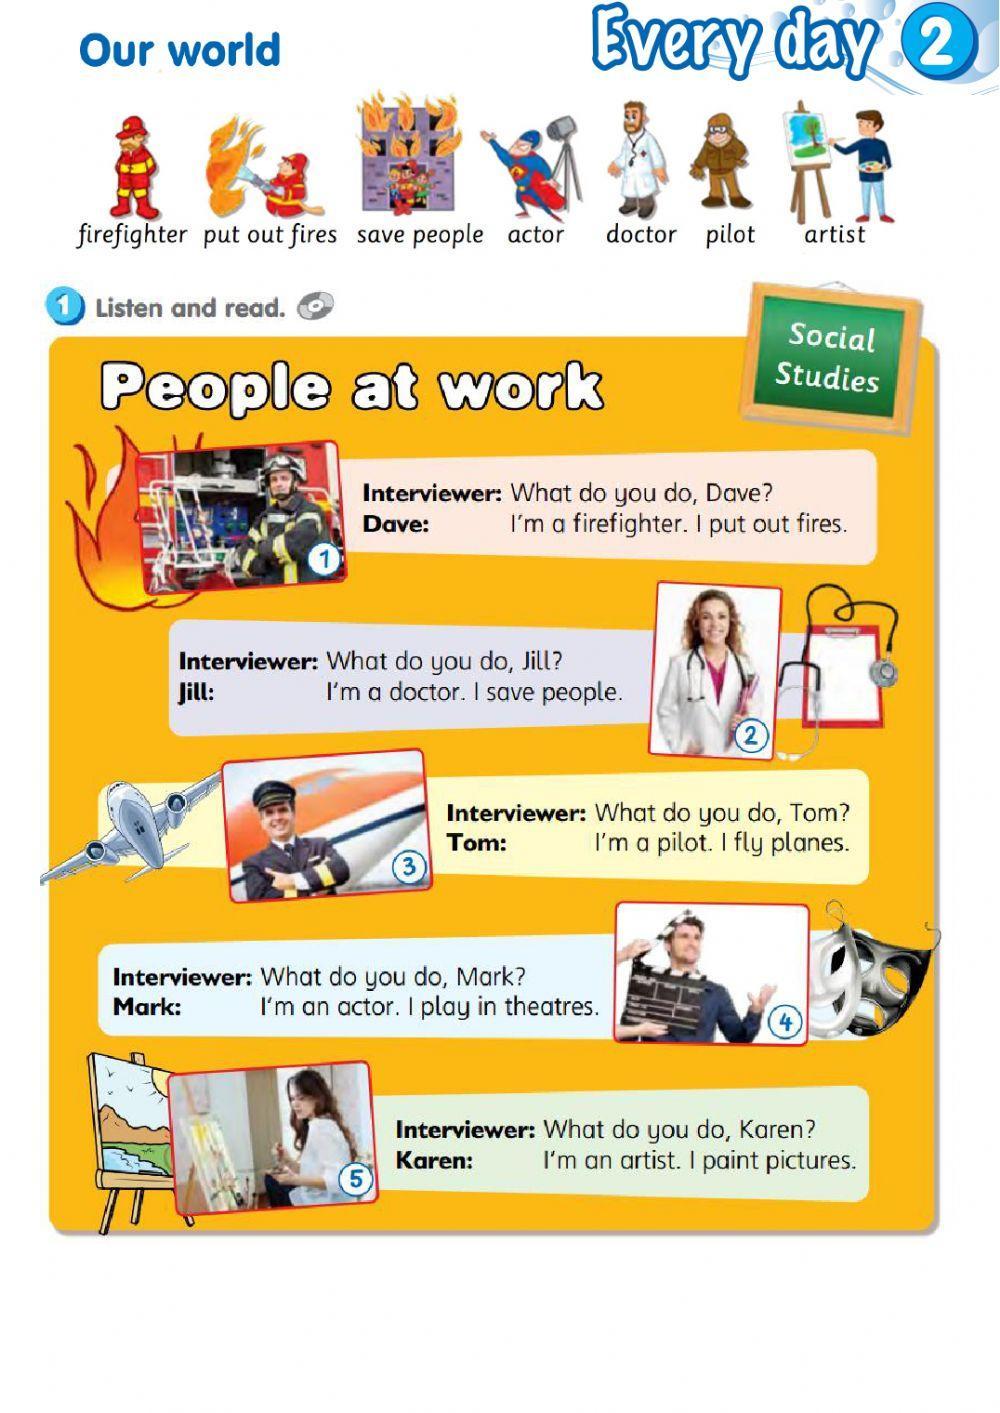 Smart Junior 3. Module 2 - Every day. Lesson 3 - Our world (Jobs)